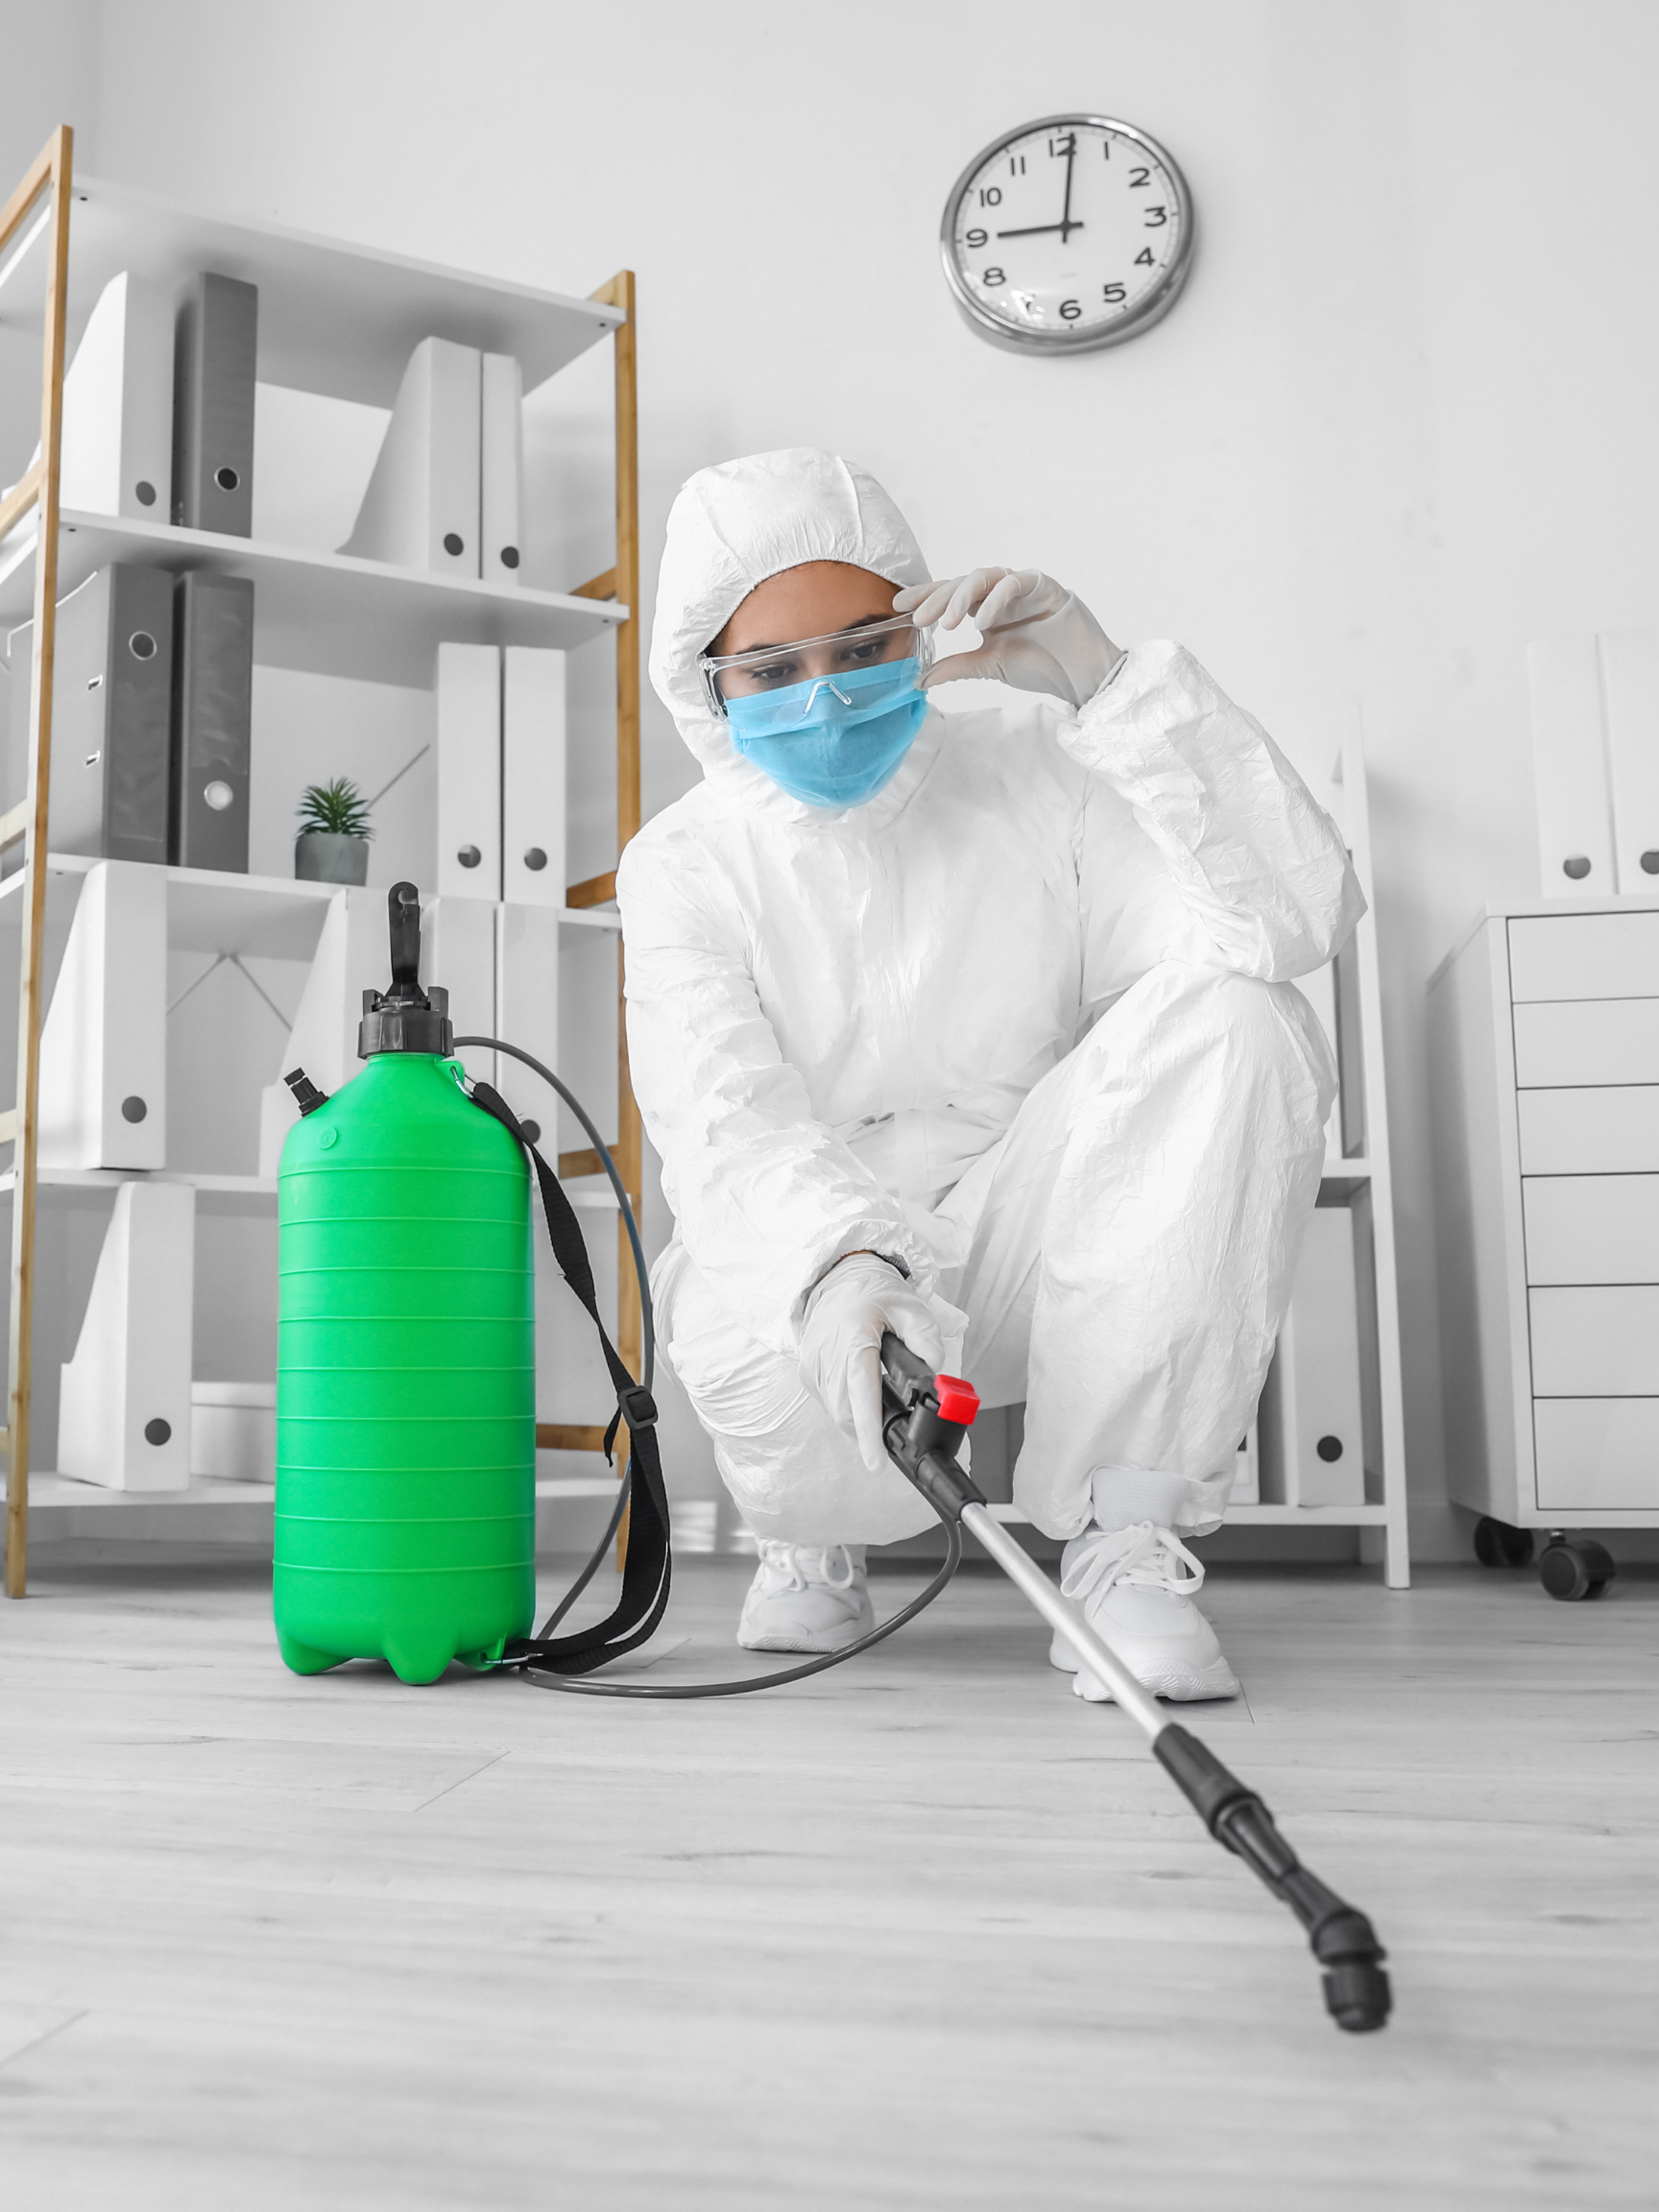 person wearing protective white clothing and a mask for disinfecting the area with a disinfecting cleaning machine